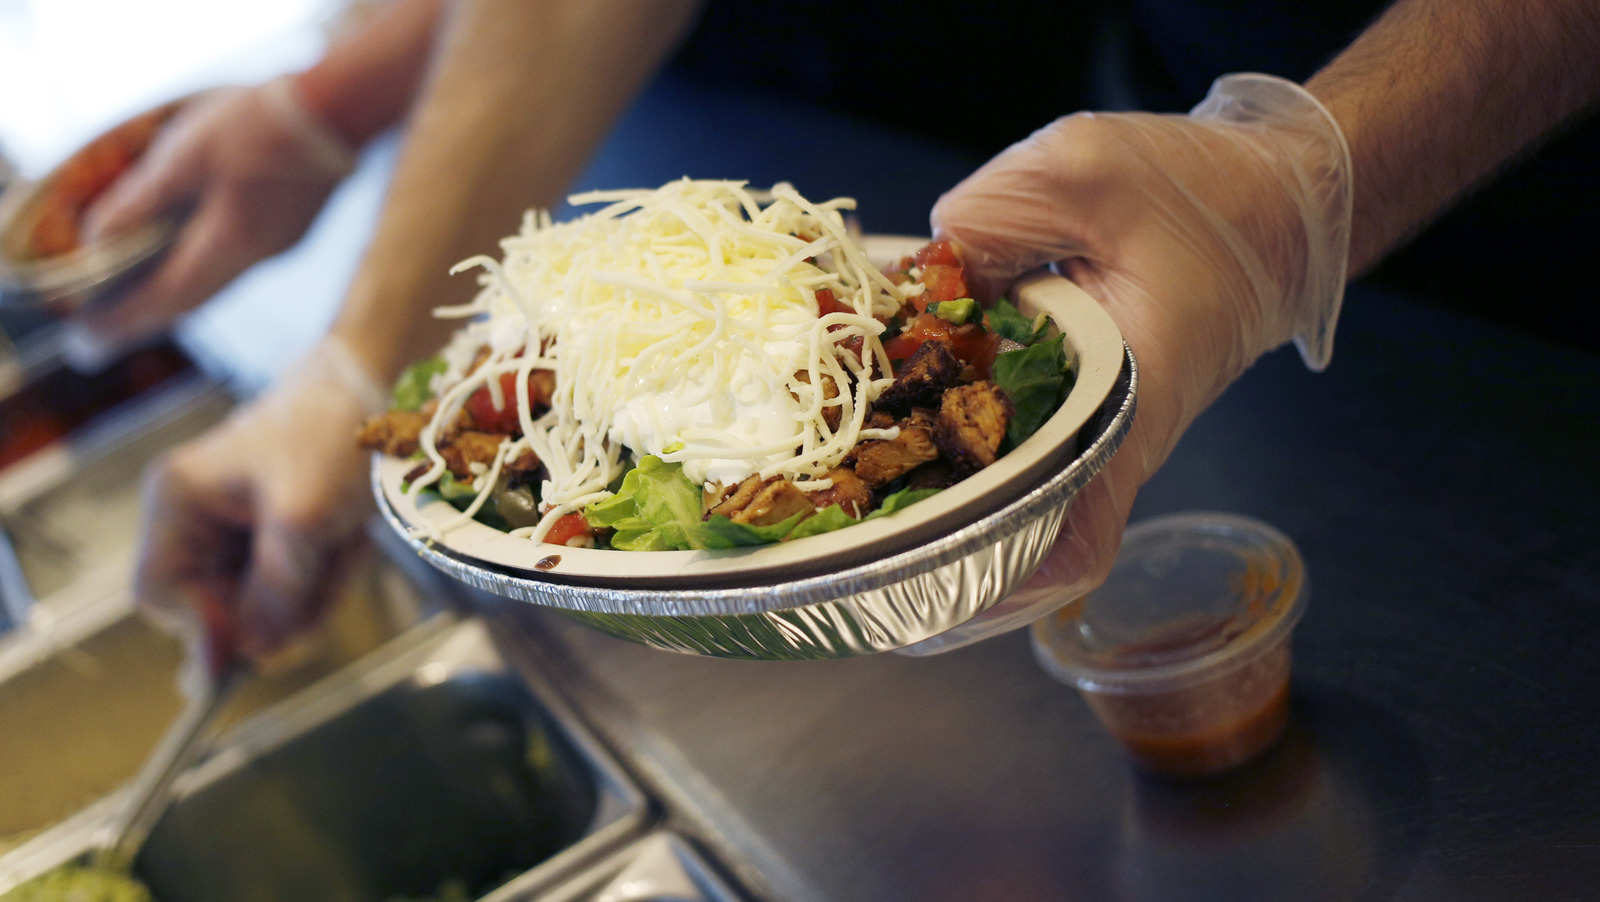 Chipotle Just Gave Away Some Of The Answers To Its IQ Test